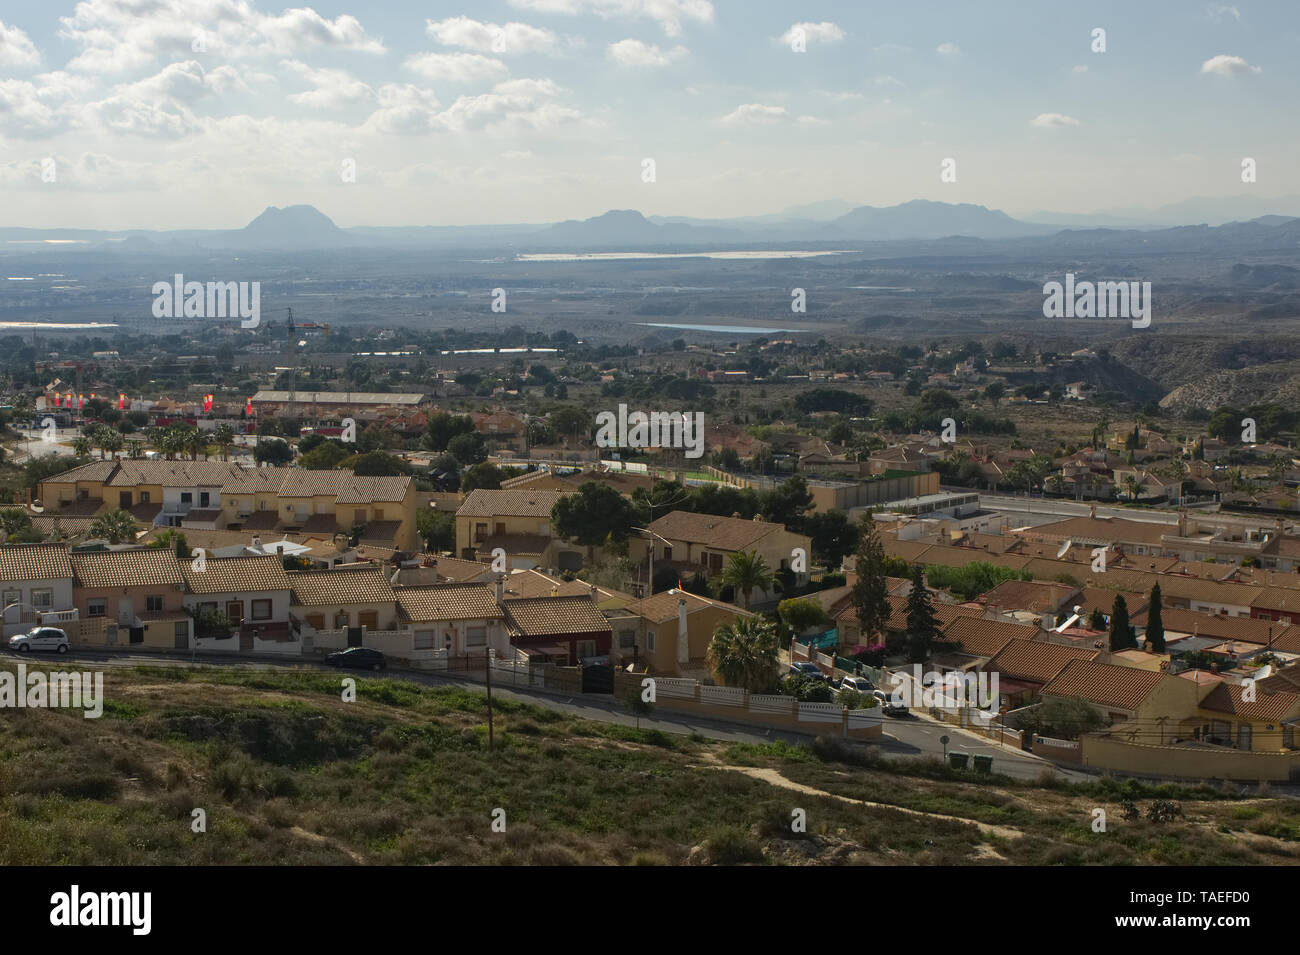 View over Countryside at Busot near Alicante, Spain Stock Photo